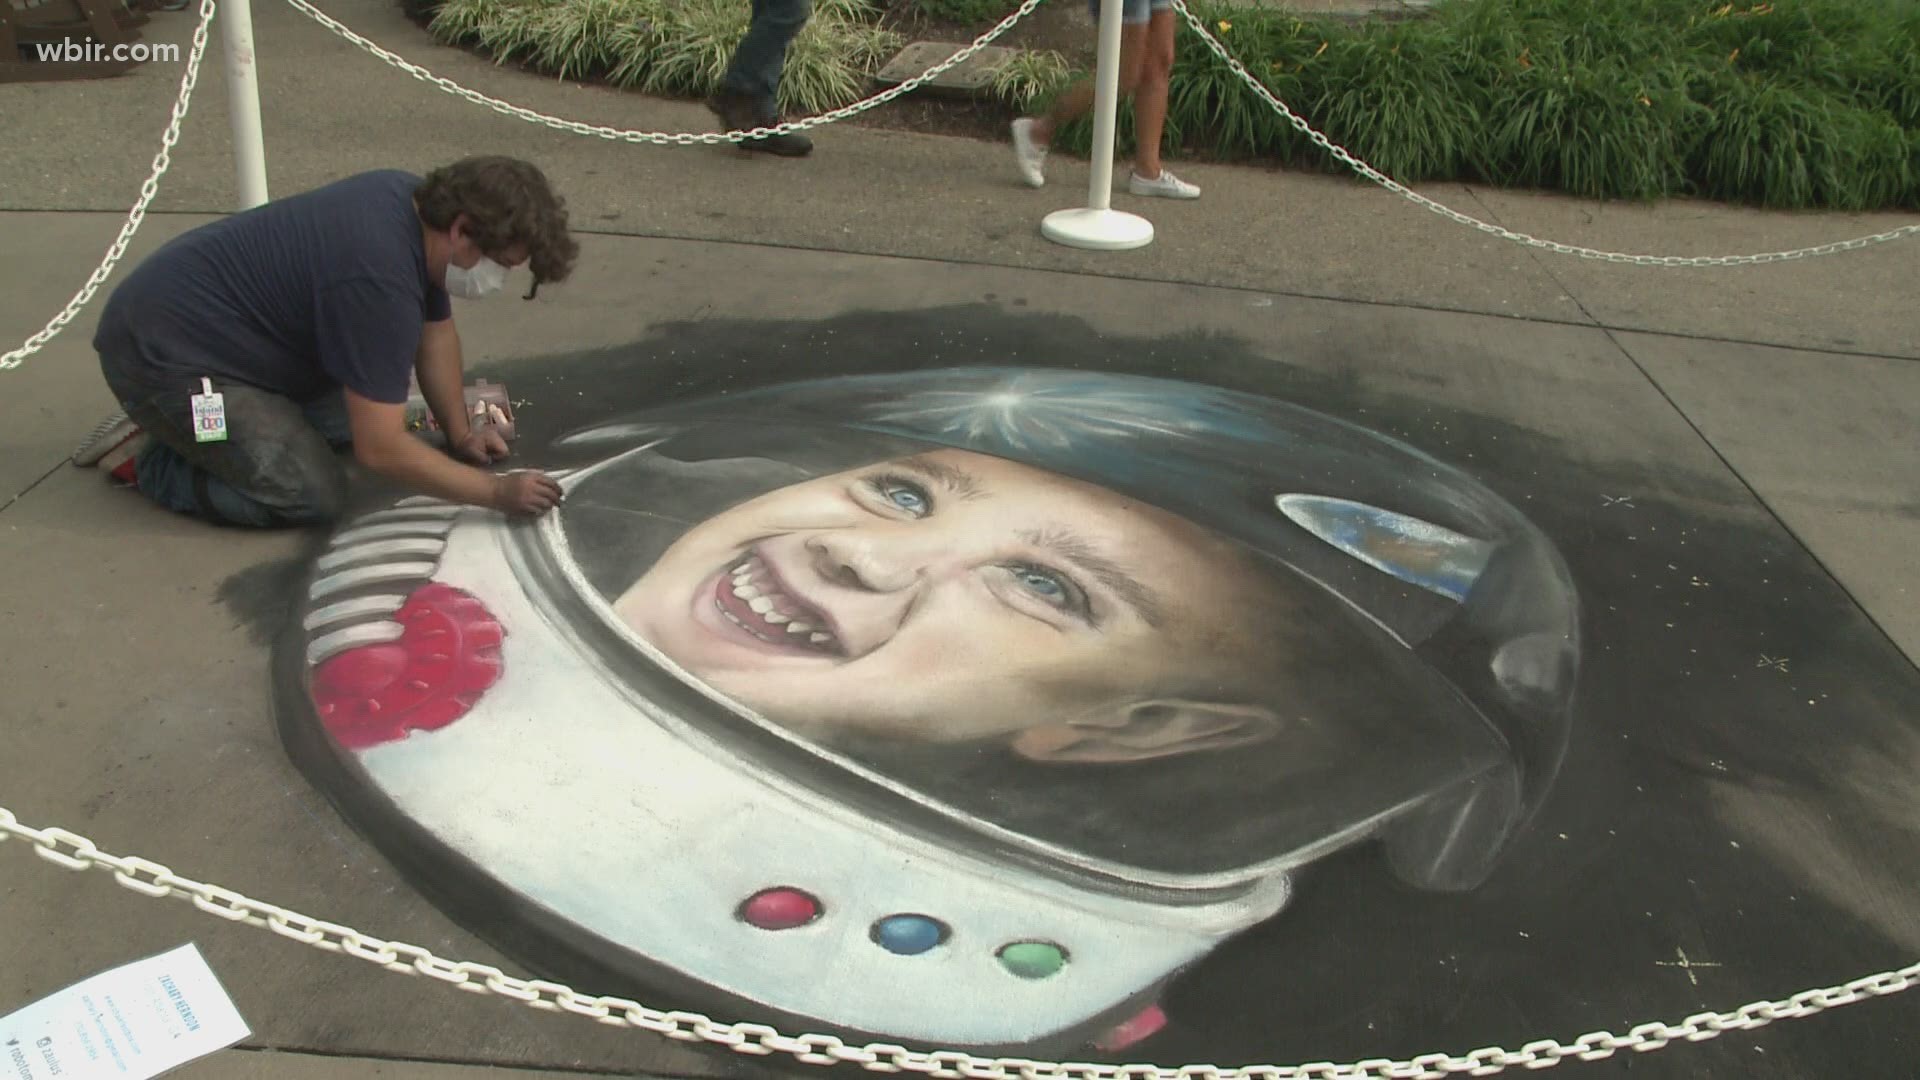 Chalk artists turned The Island in Pigeon Forge into their temporary canvas on Sunday.